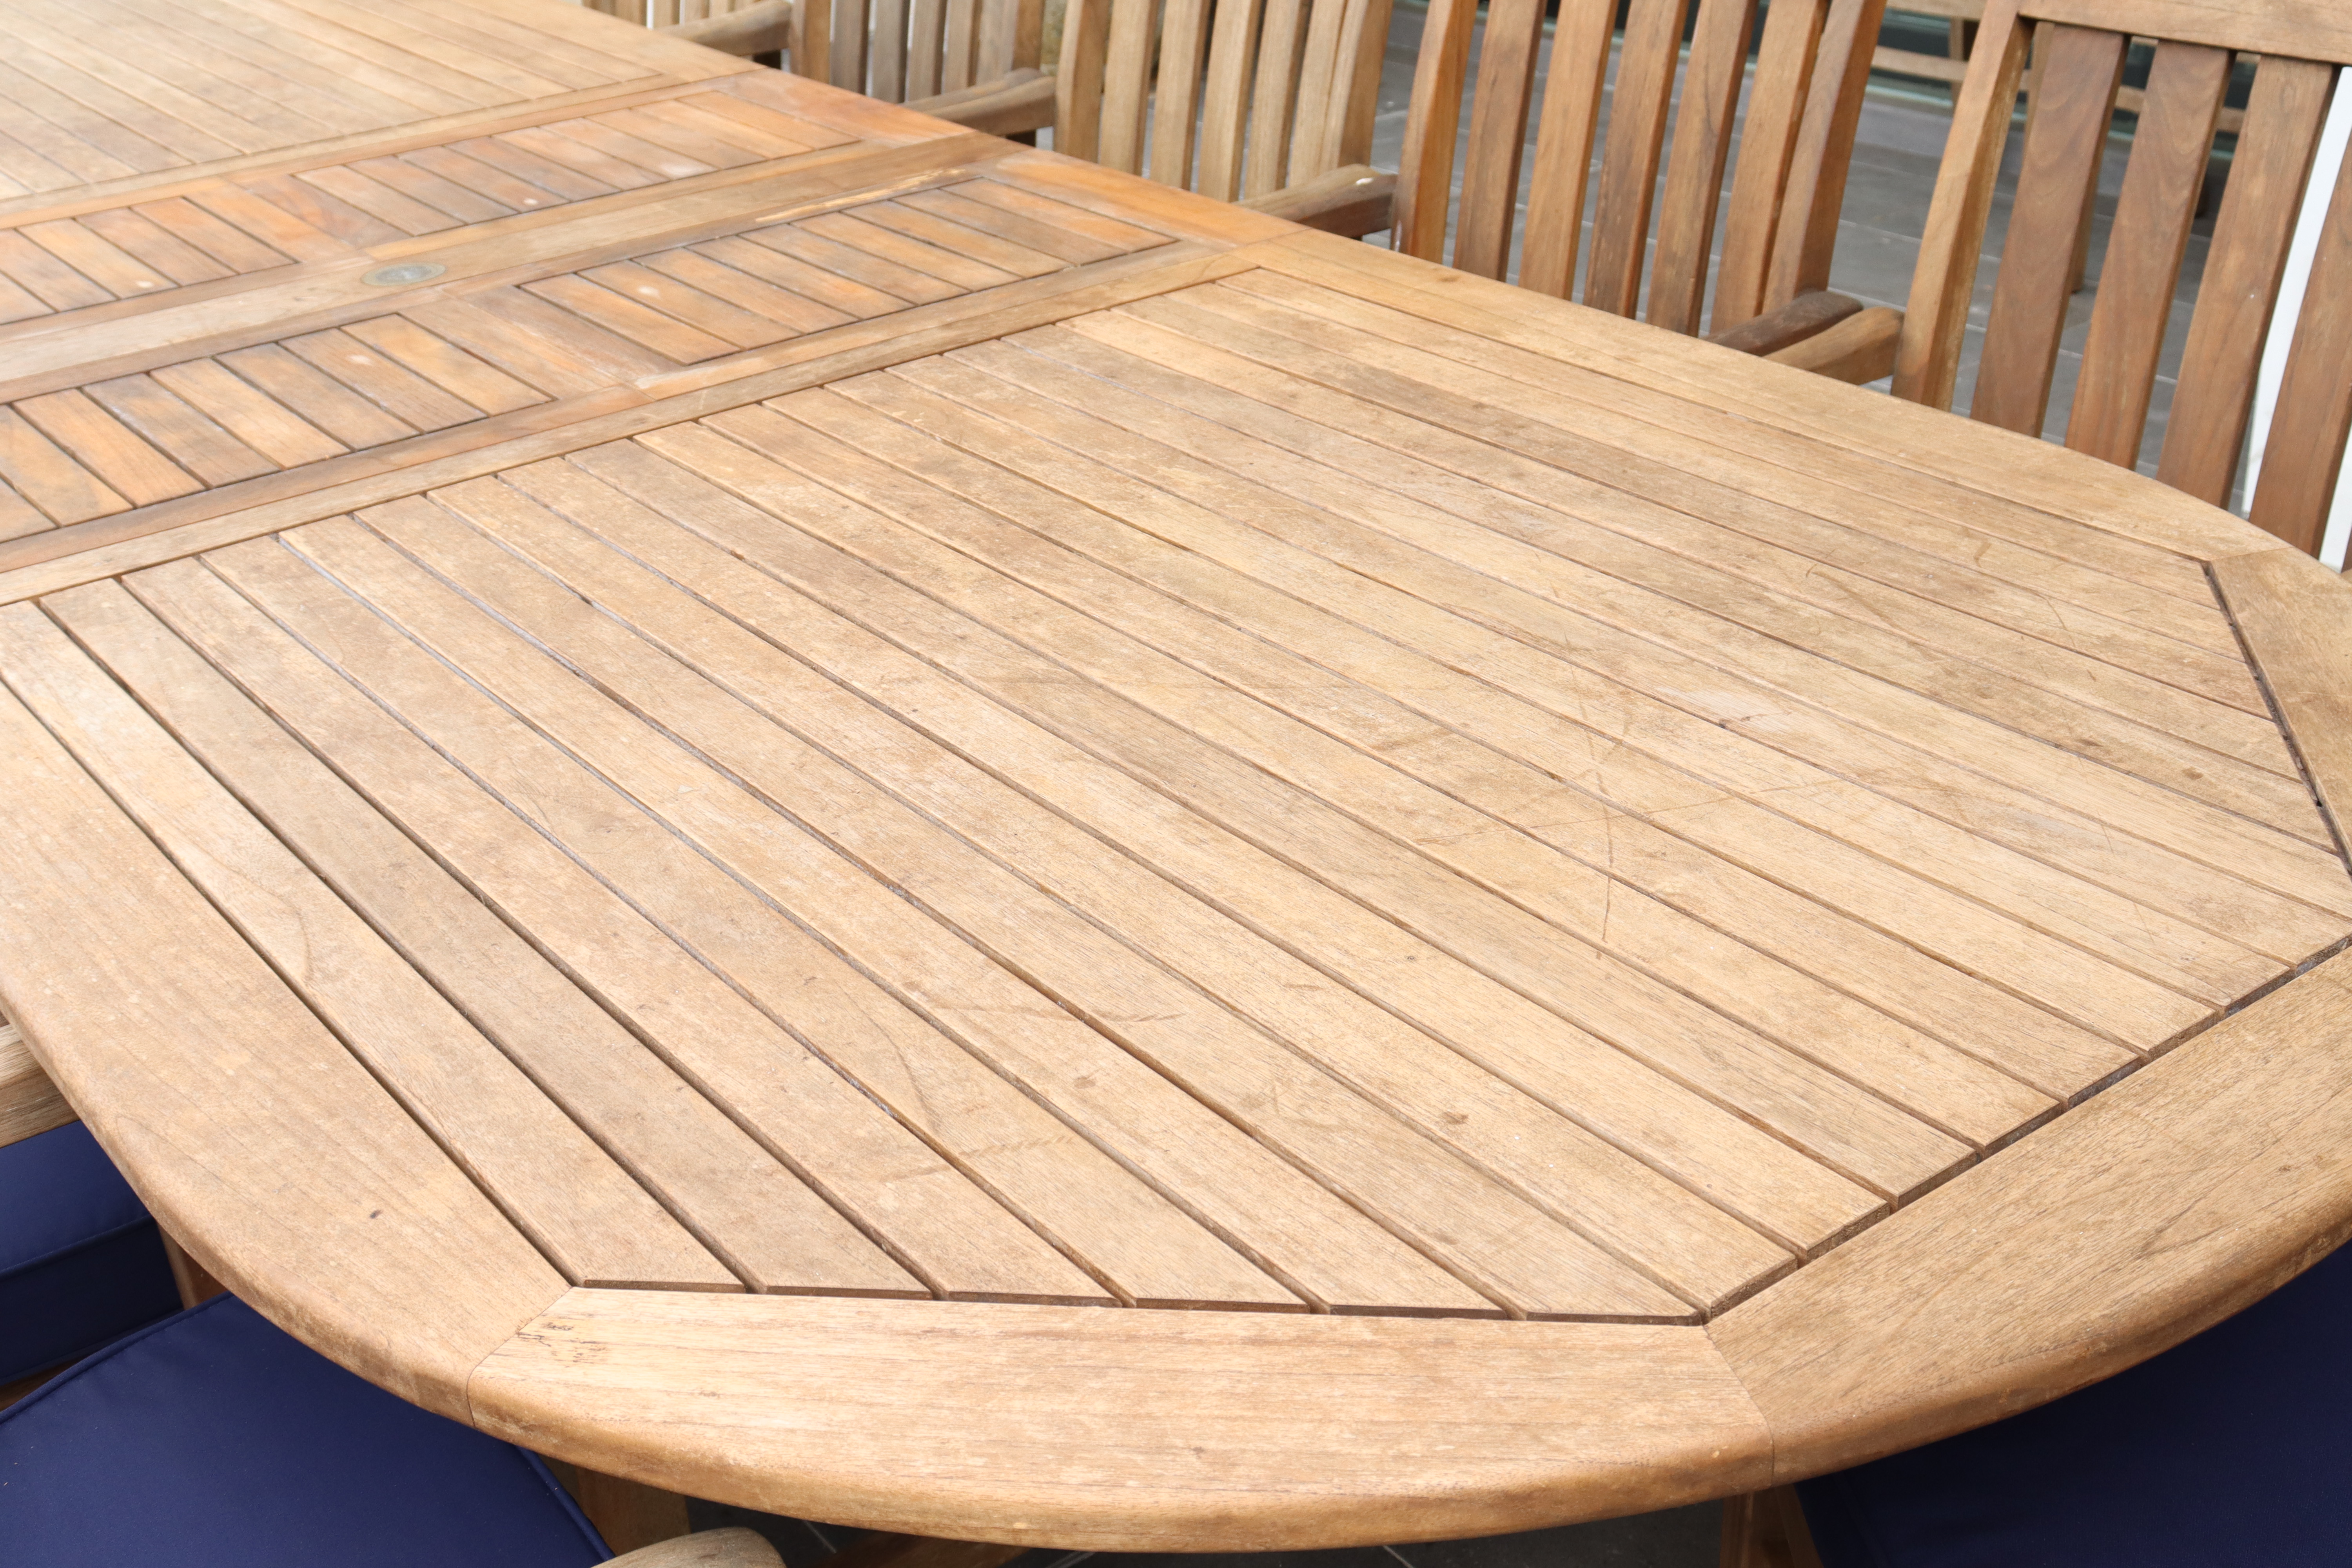 A LARGE TEAK OUTDOOR FURNITURE SET BY NAUTIQUE - Image 2 of 4